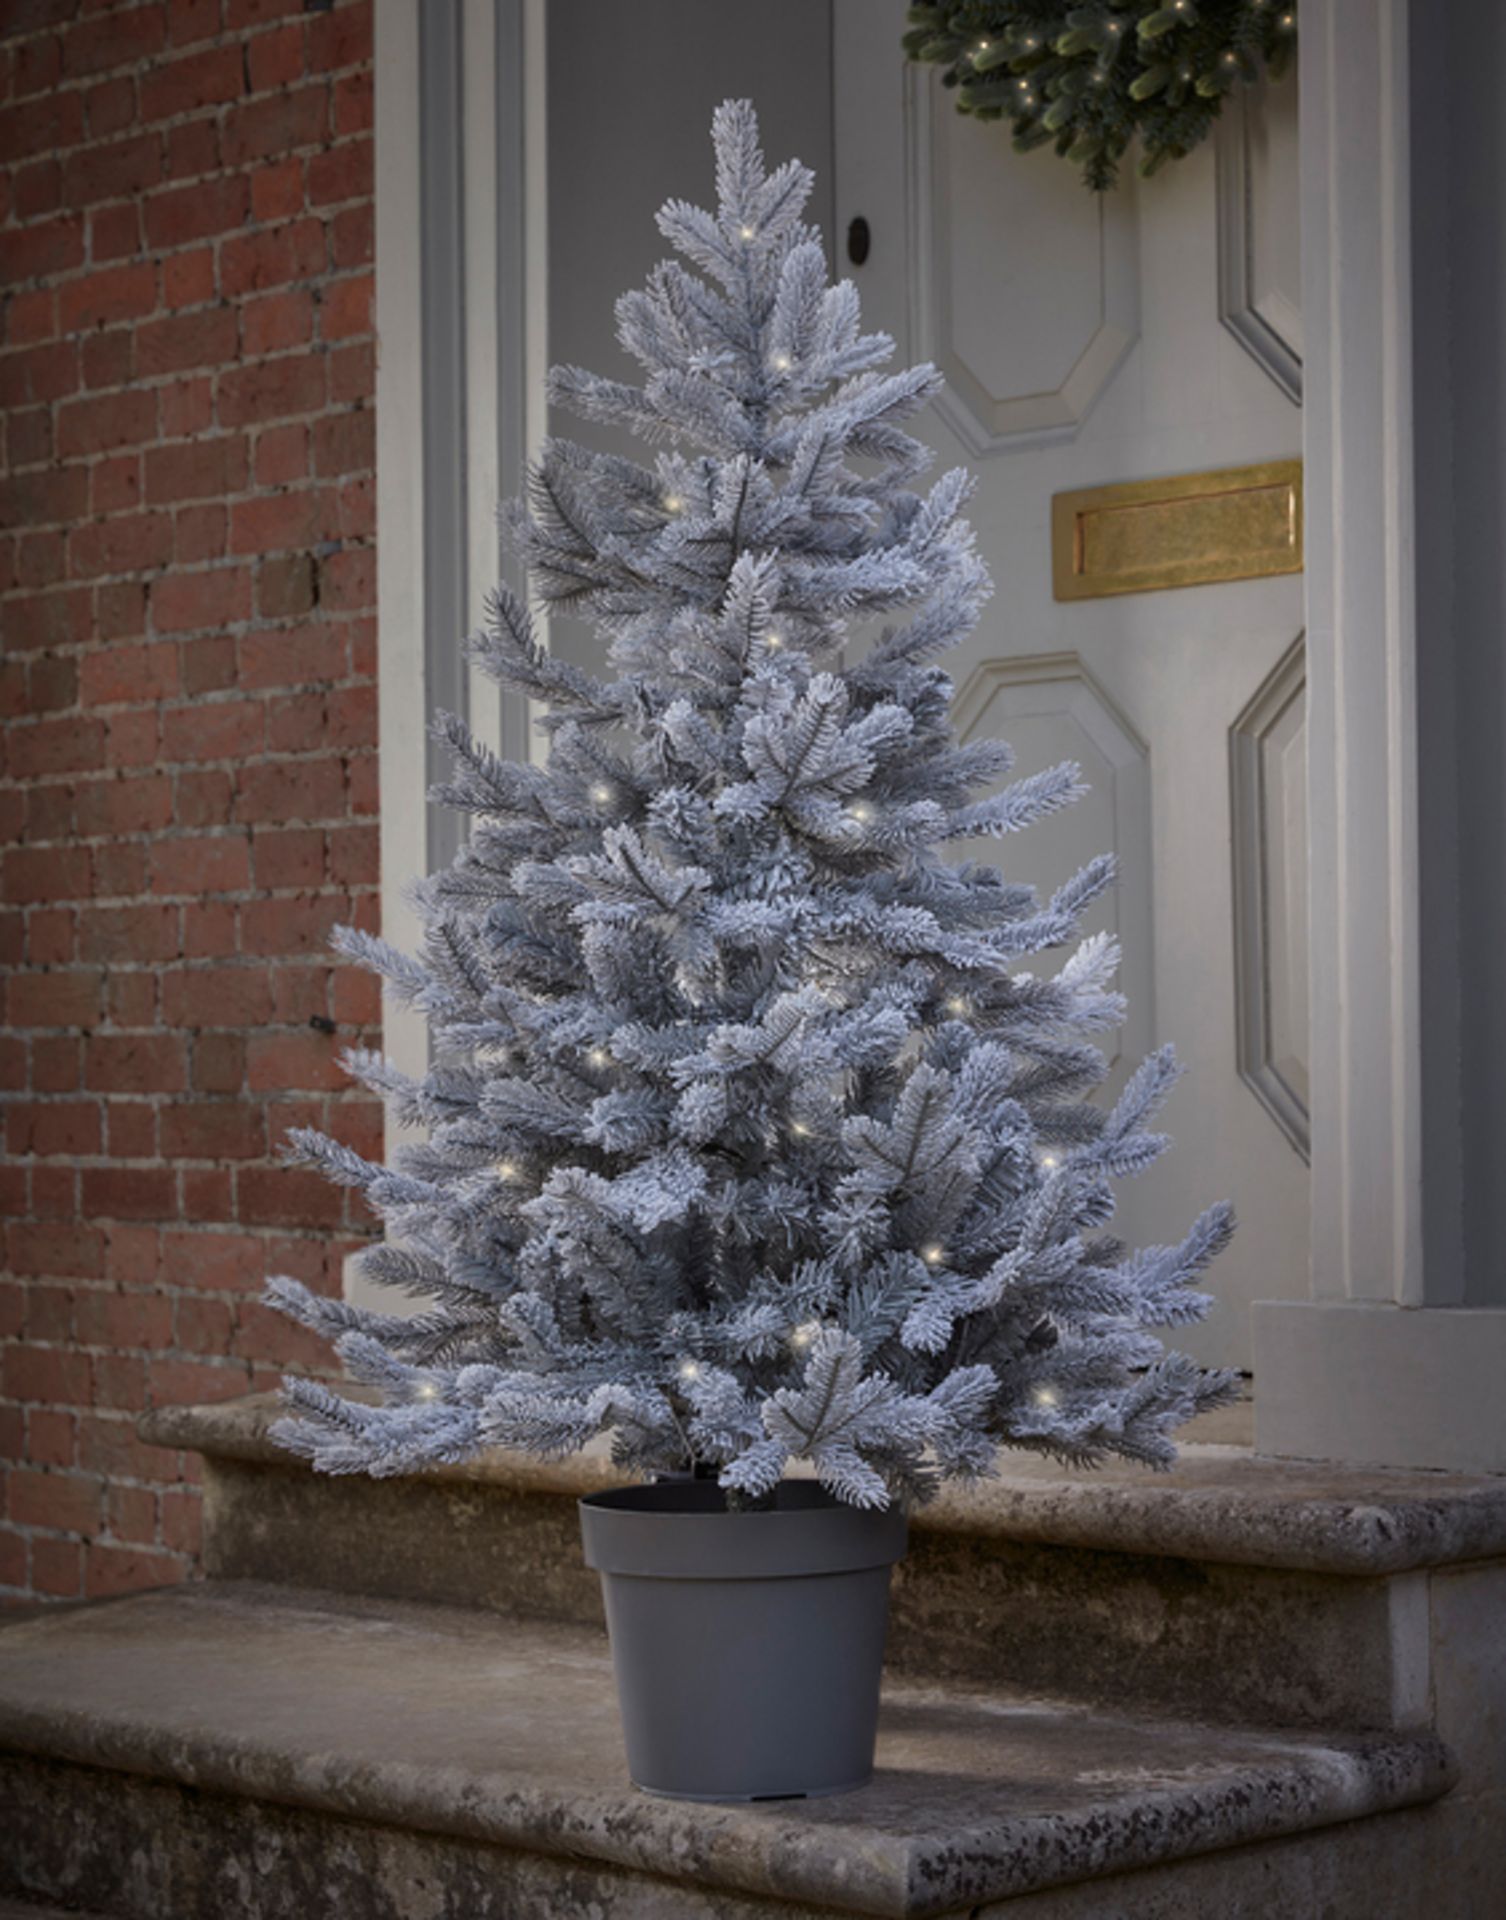 Frosted Fir Pre-Lit Potted Tree. A pretty frosted pre-lit tree with bushy branches which comes in